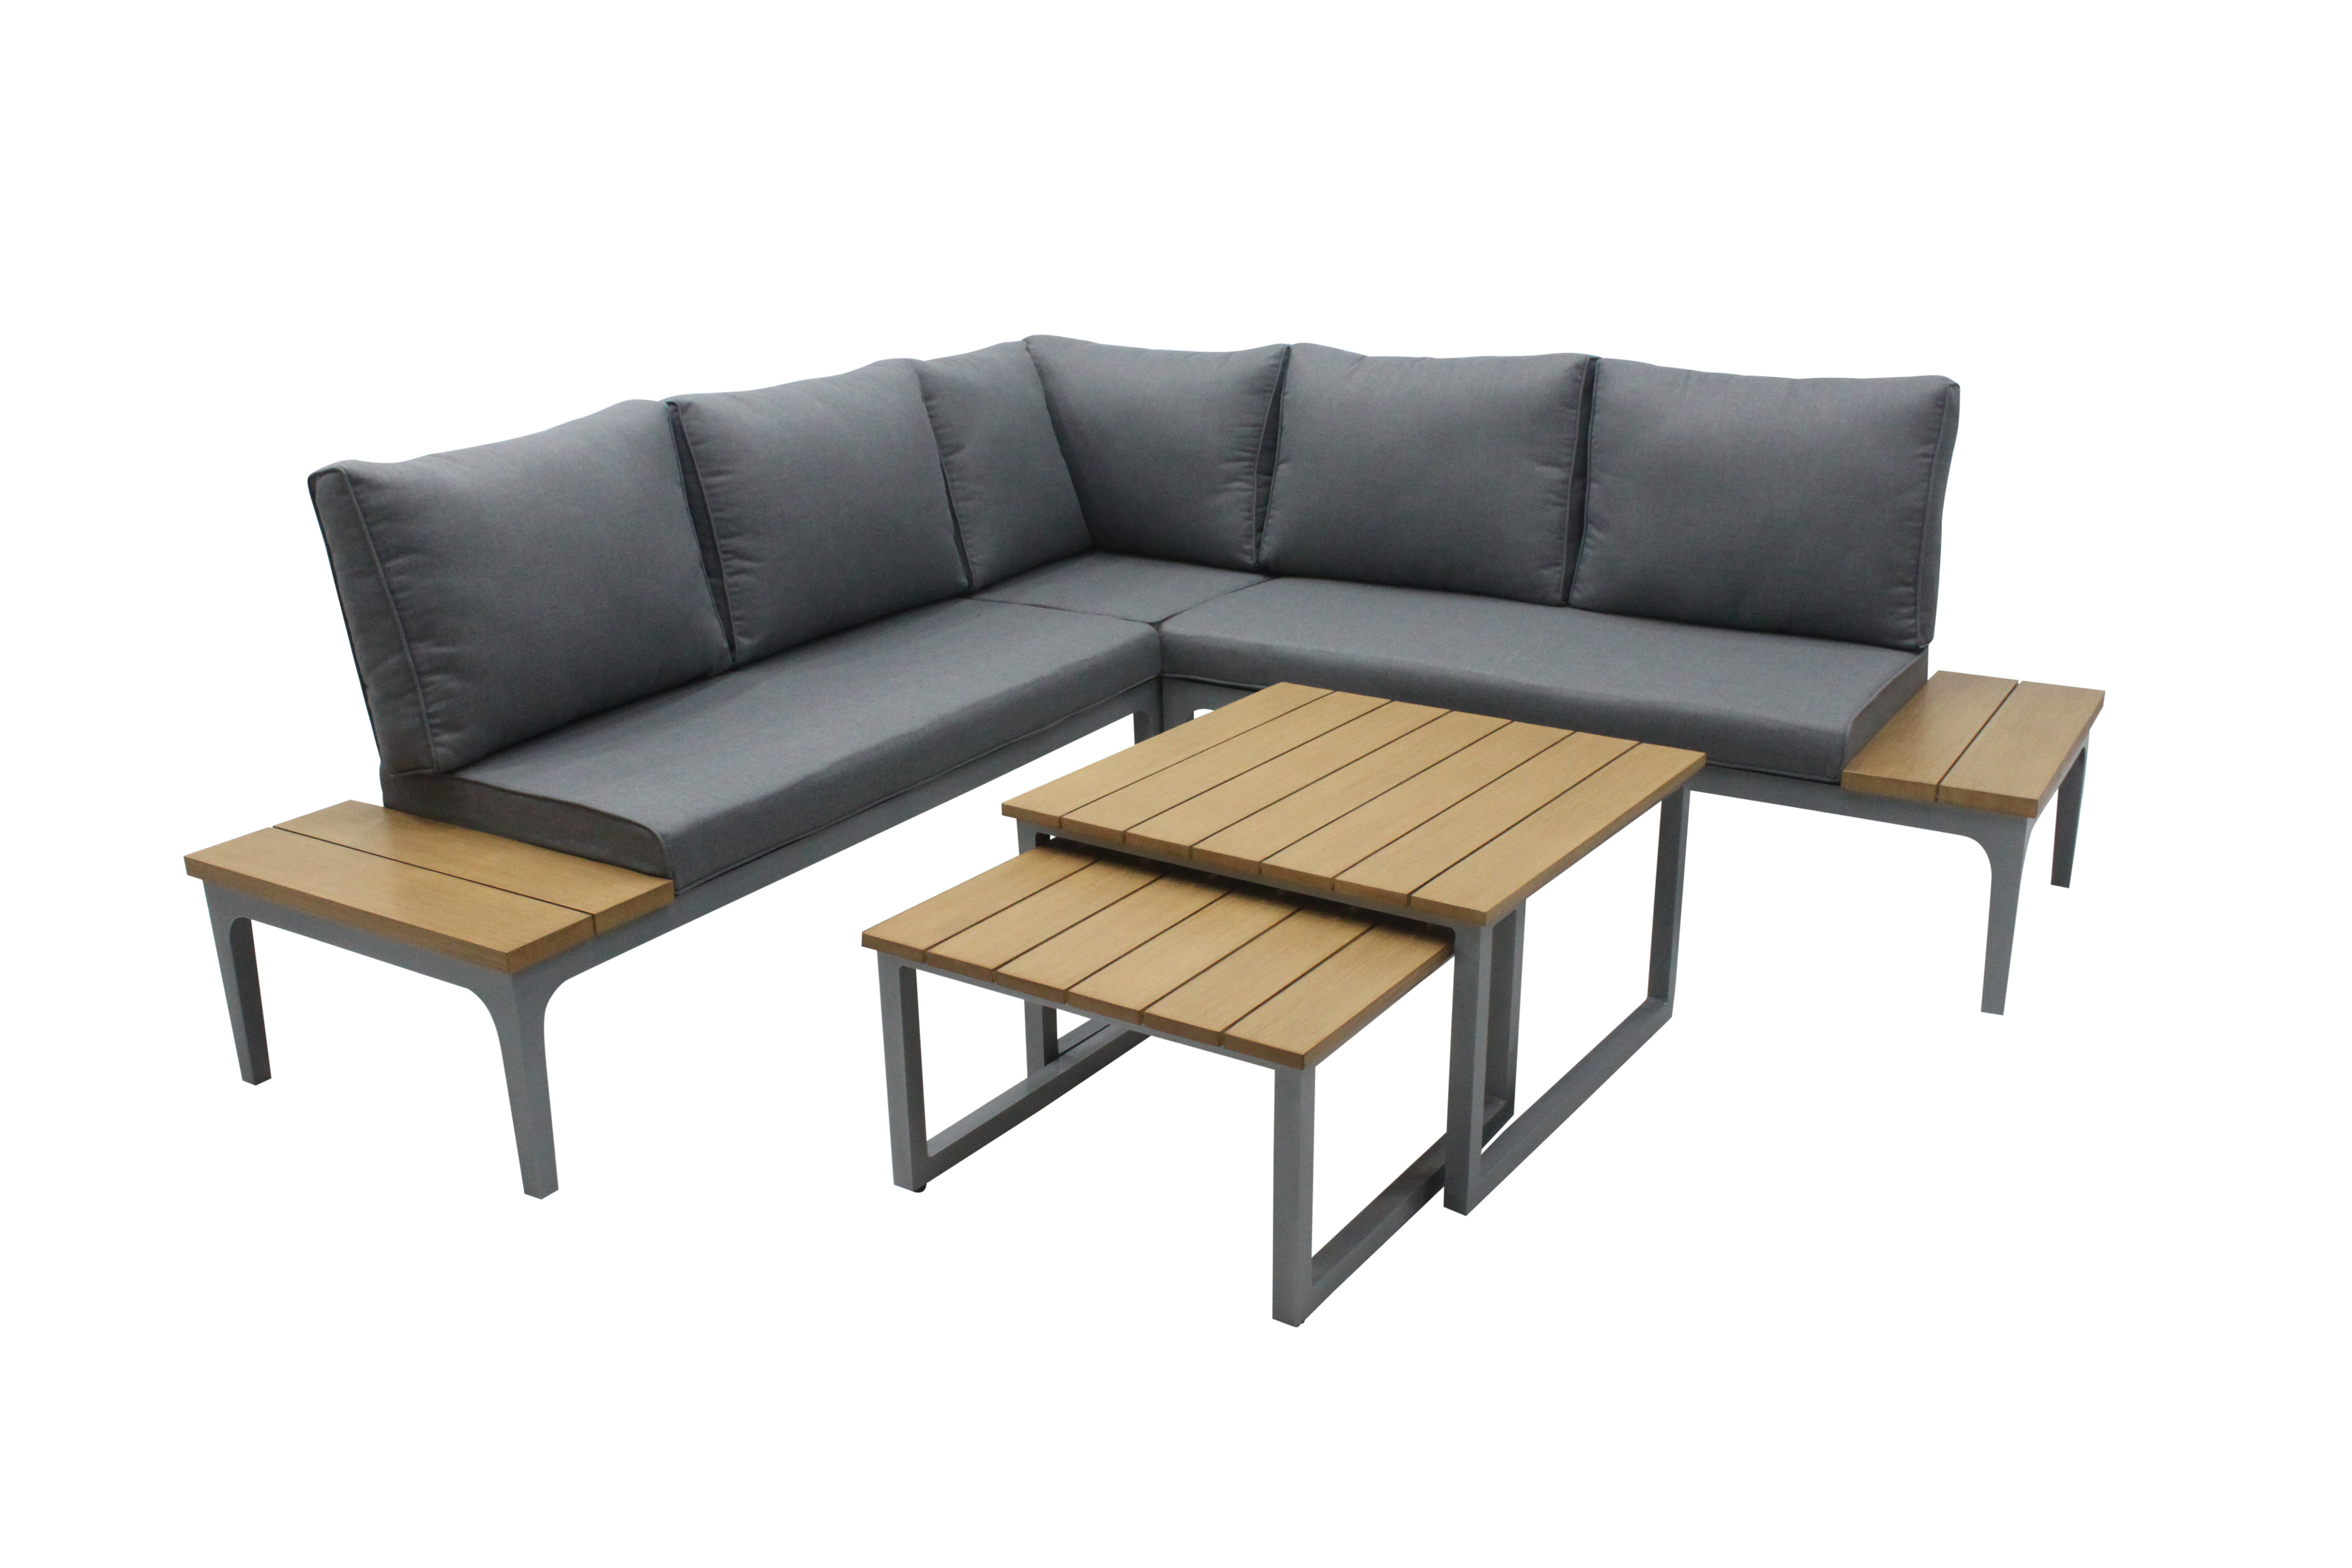 LG Outdoor Siena Cushioned Modular Lounge Set with Nested Tables (Light/Modern Grey)